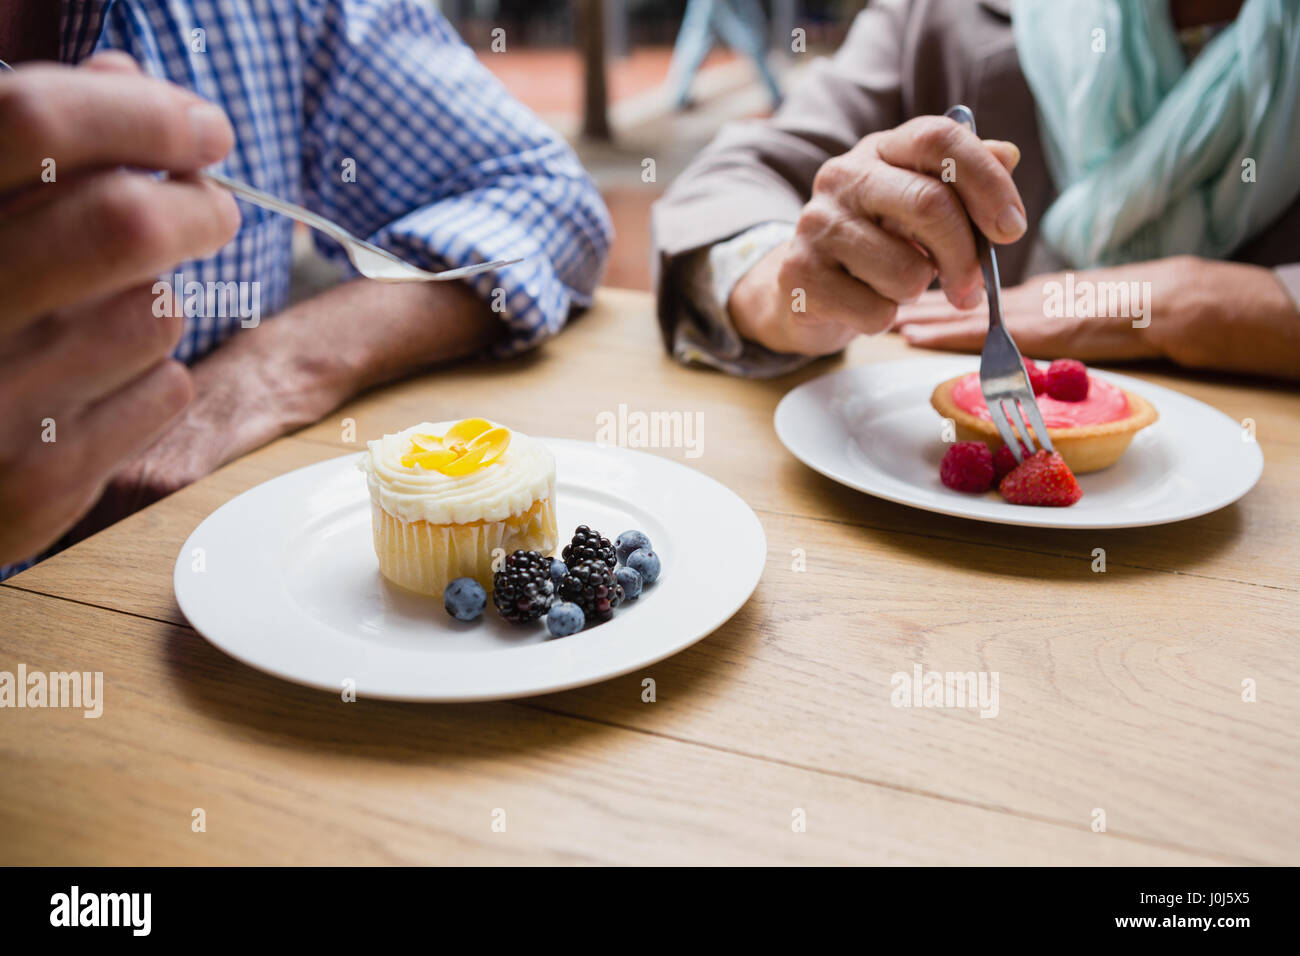 Senior couple having cupcake with blueberries and blackberries in outdoor cafÃƒÂ© Stock Photo